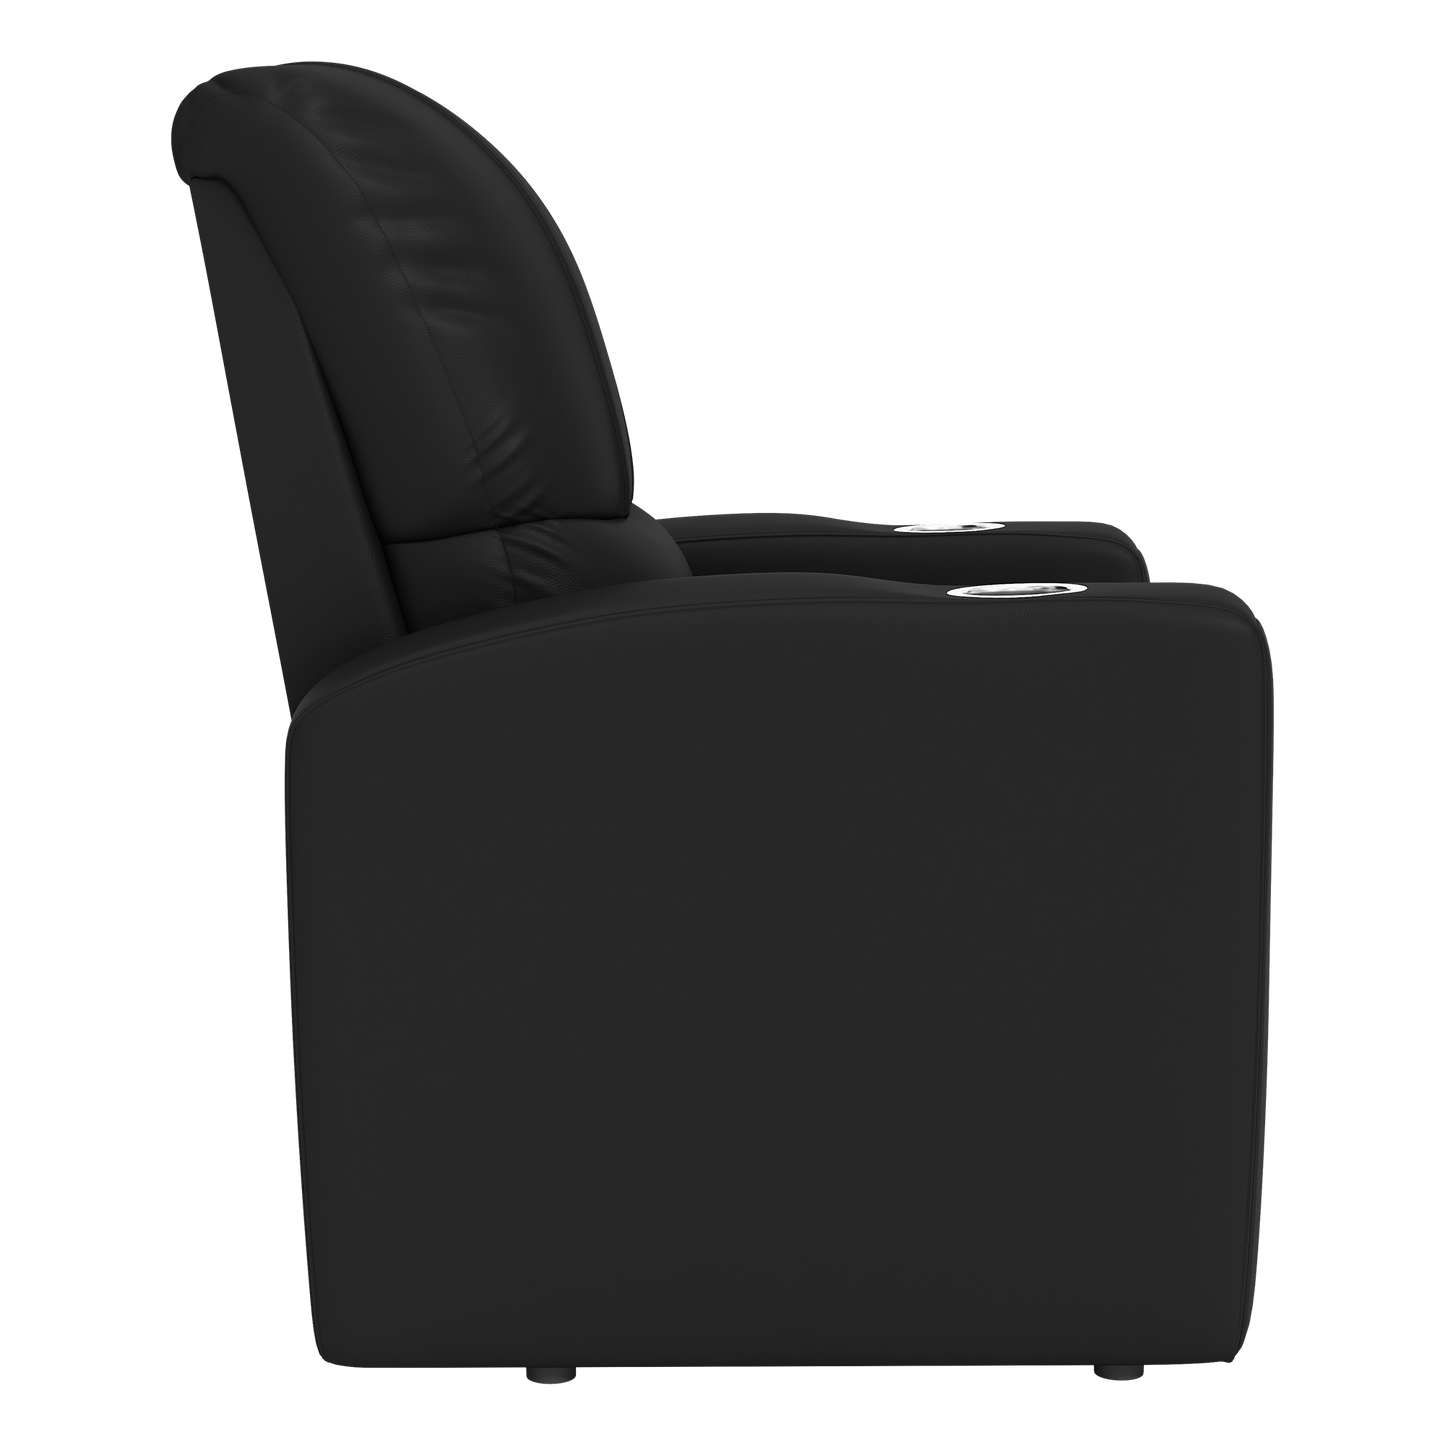 Stealth Recliner with Toronto Raptors Primary 2019 Champions  Logo